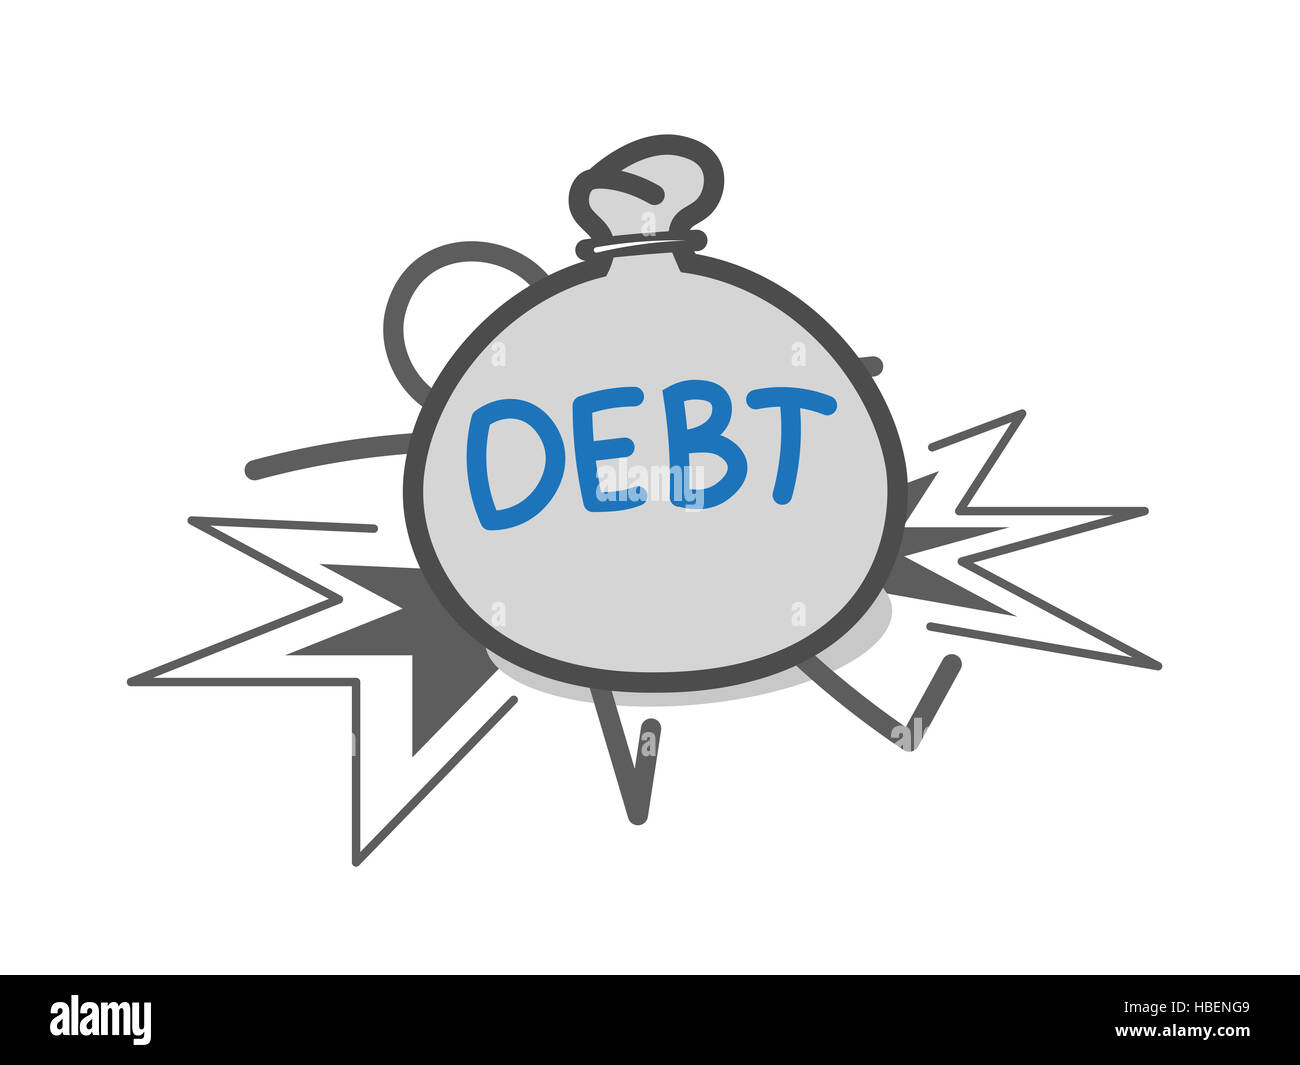 Crushed by debts Stock Photo